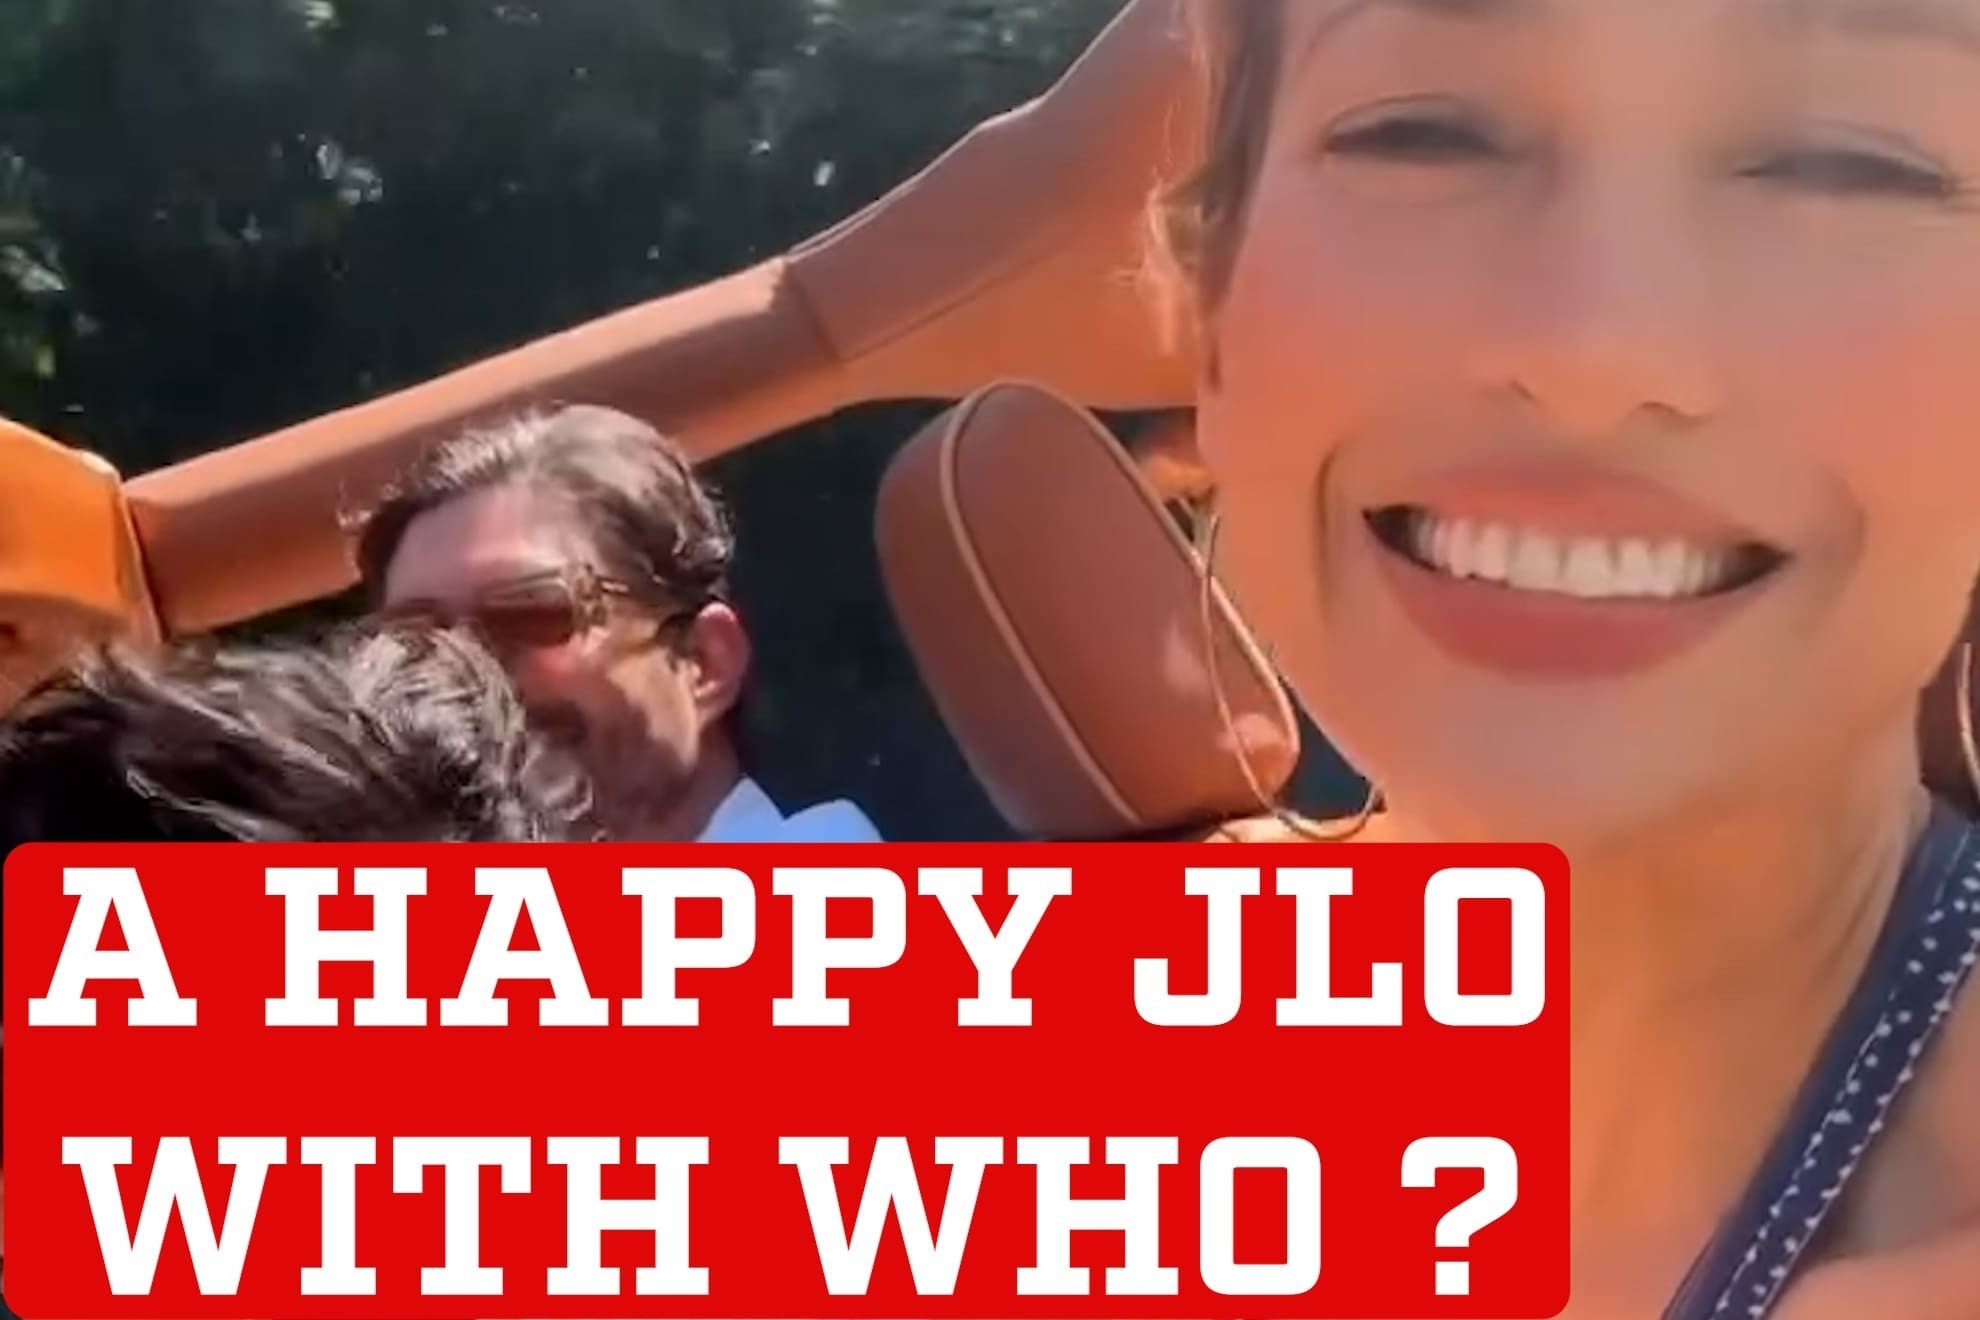 Jennifer lopez is happy before the 4th of July